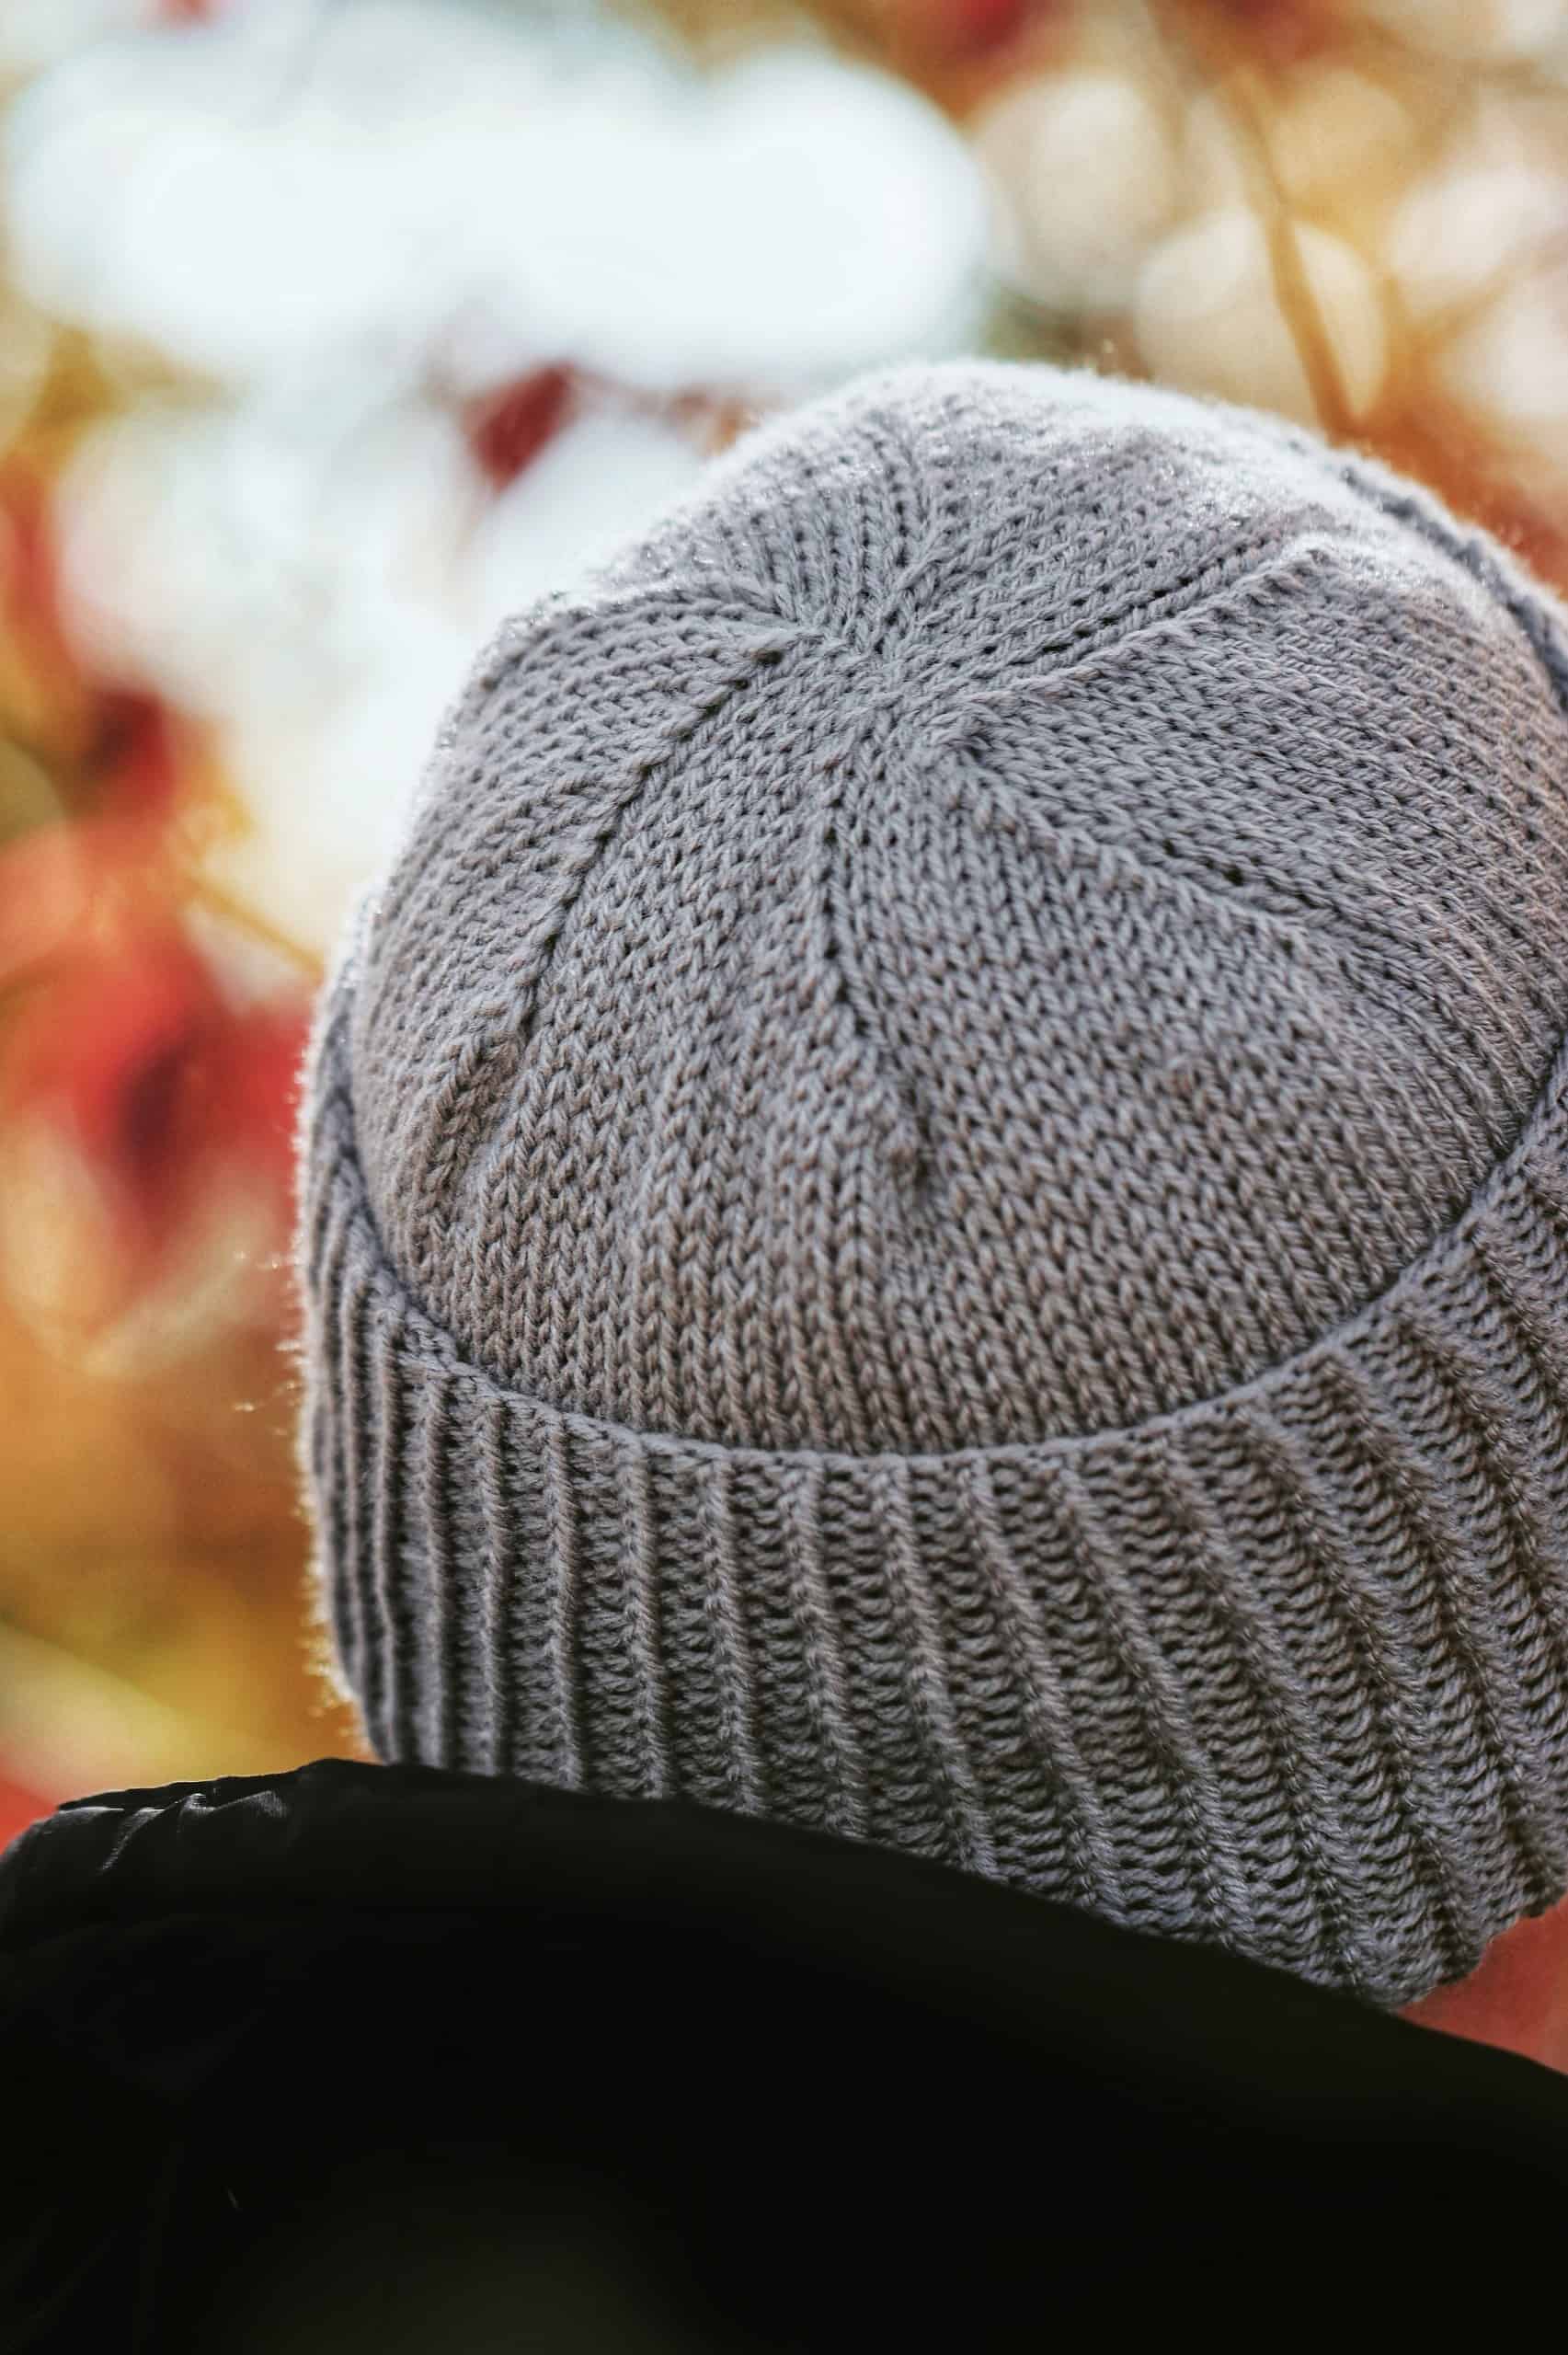 Fashionable Knitted Knitted Beanie Hat For Men Classic Triangle